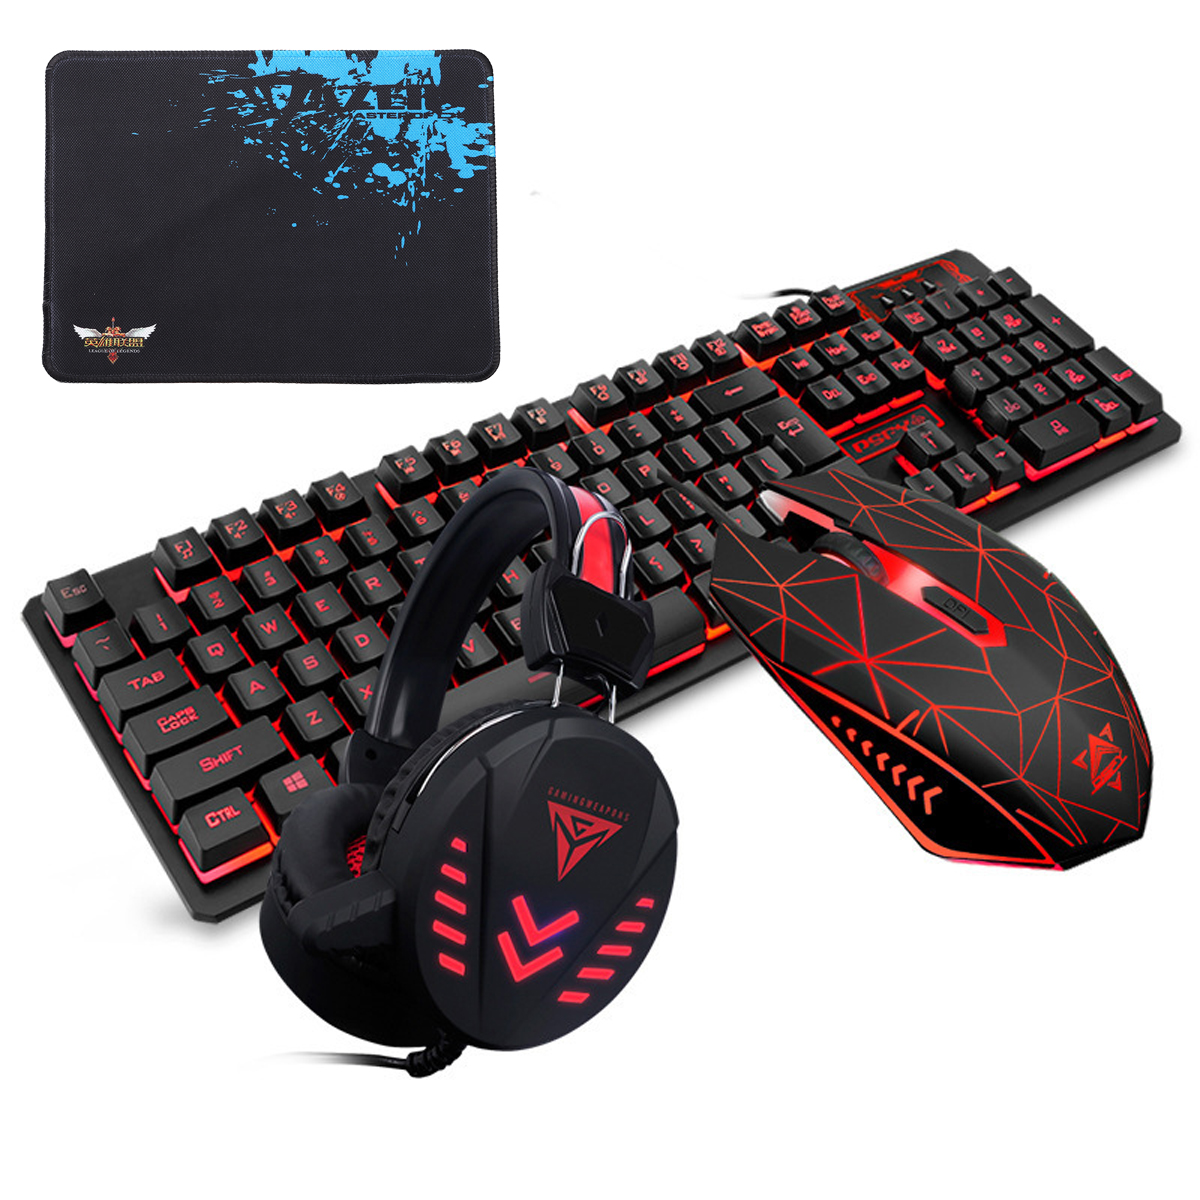 3 in 1 Mechanical Keyboard and Mouse and Headset Combo,104 Key Wired LED Backlit Gaming Keyboard and 4 Adjustable DPI 6 Button Mouse and USB Headset with Mic, Mouse Pad as a Gift - image 1 of 9